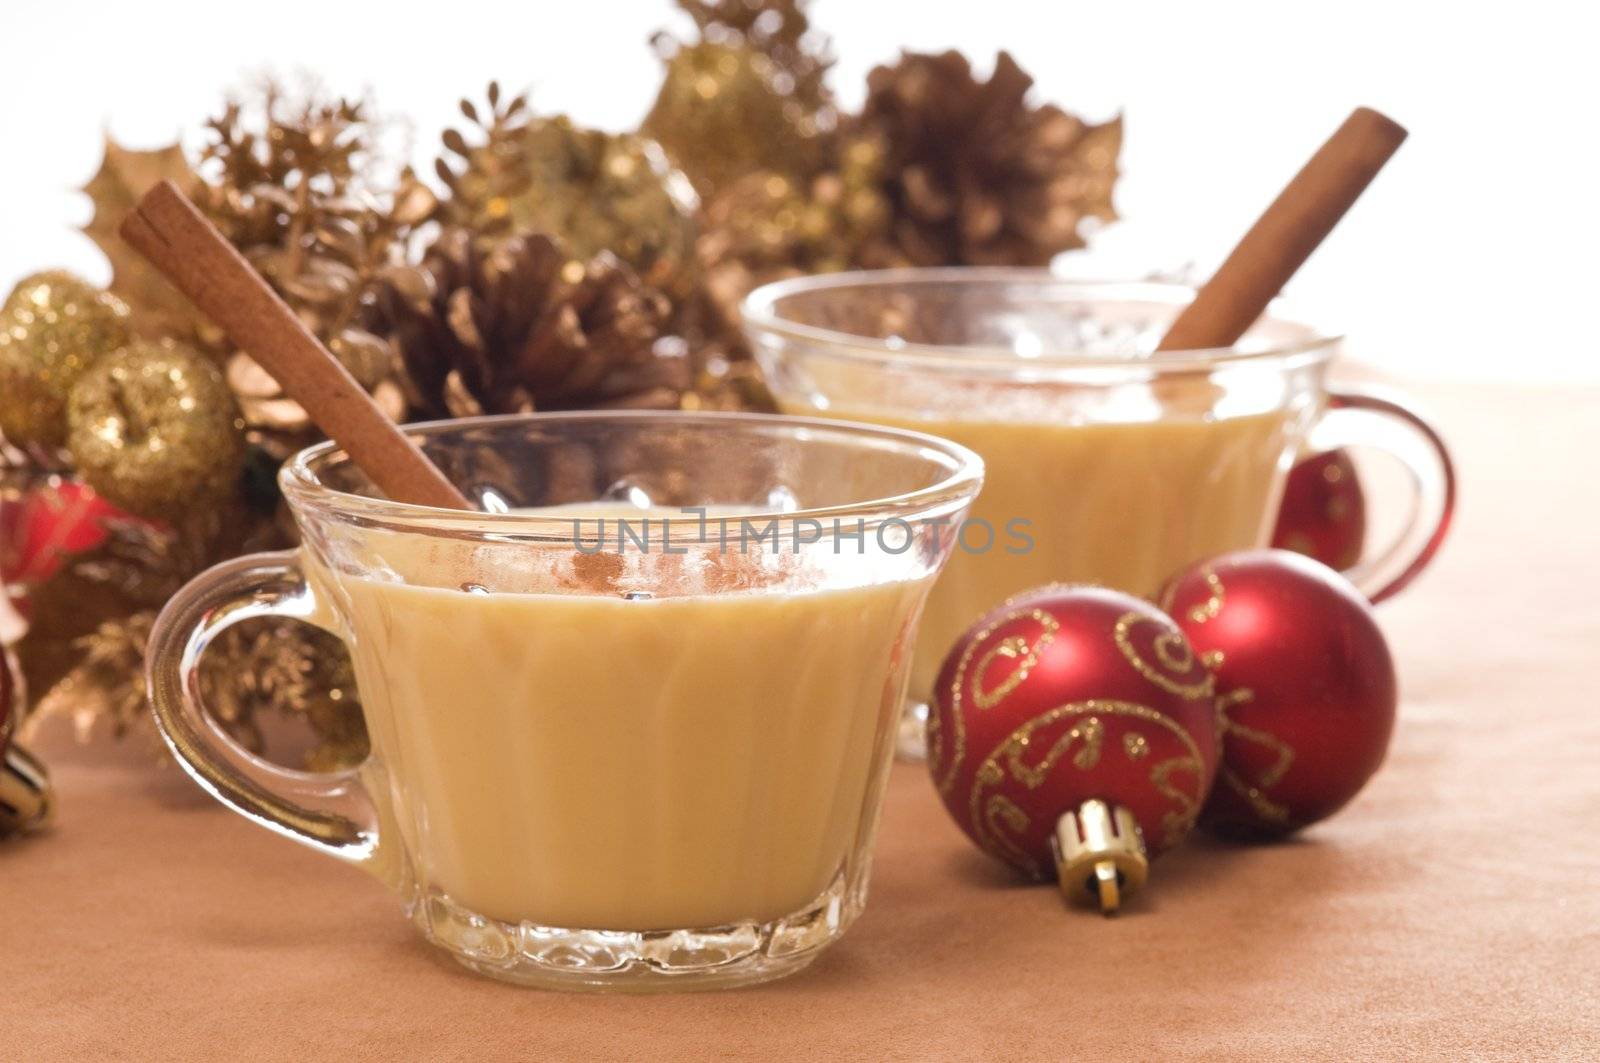 Glasses of festive eggnog with christmas decorations.